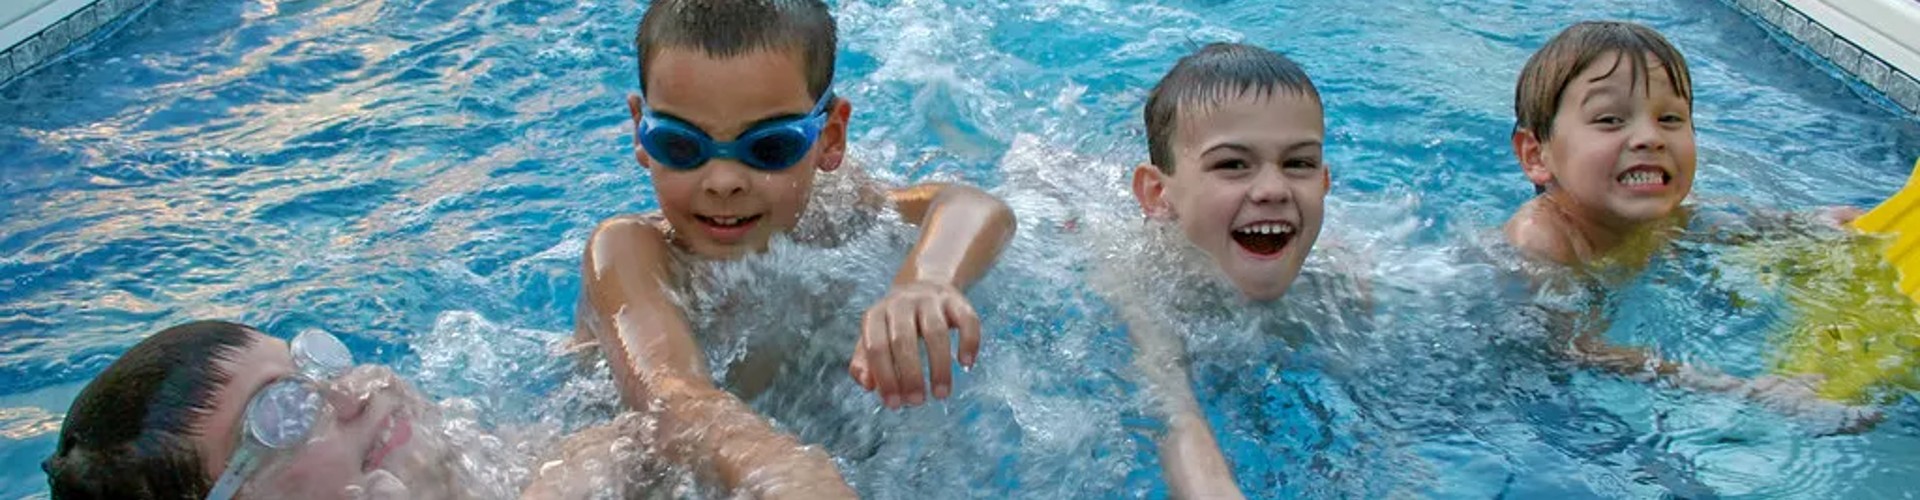 Why Buy a Recreation Pool?